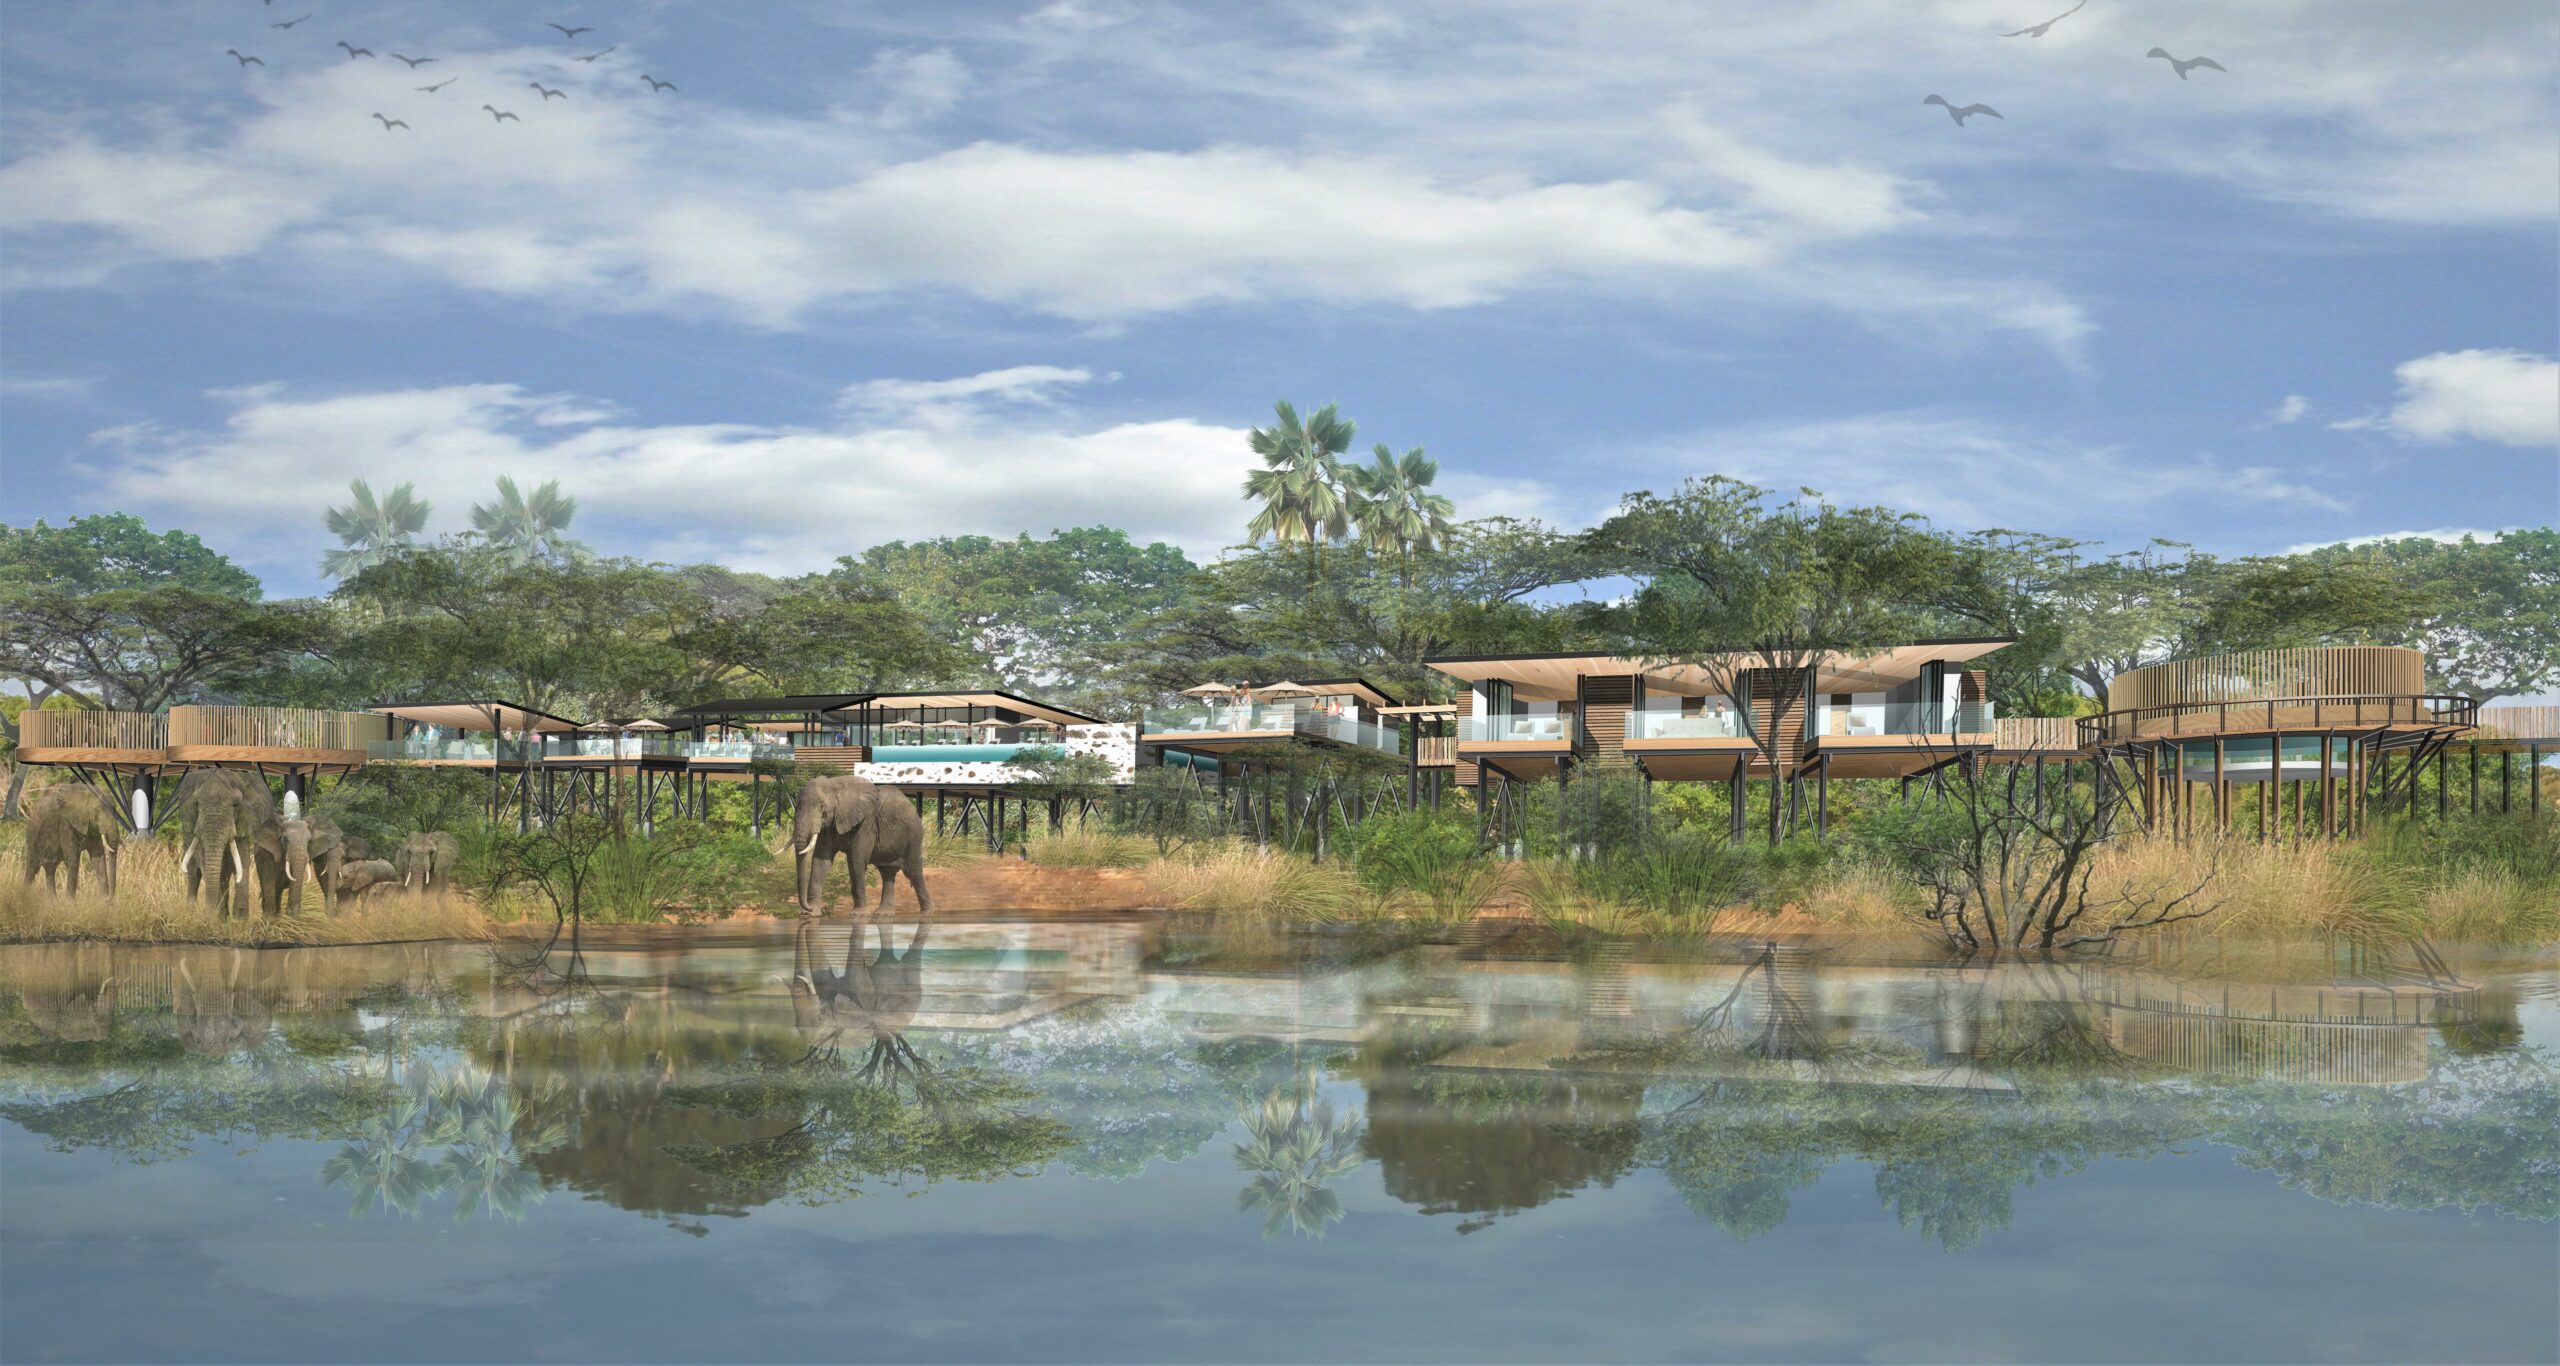 New tree-level, stilted lodges and villas are being constructed at the new Six Senses Victoria Falls on the Zambezi River. Photo by Six Senses Hotels, Resorts and Spas.